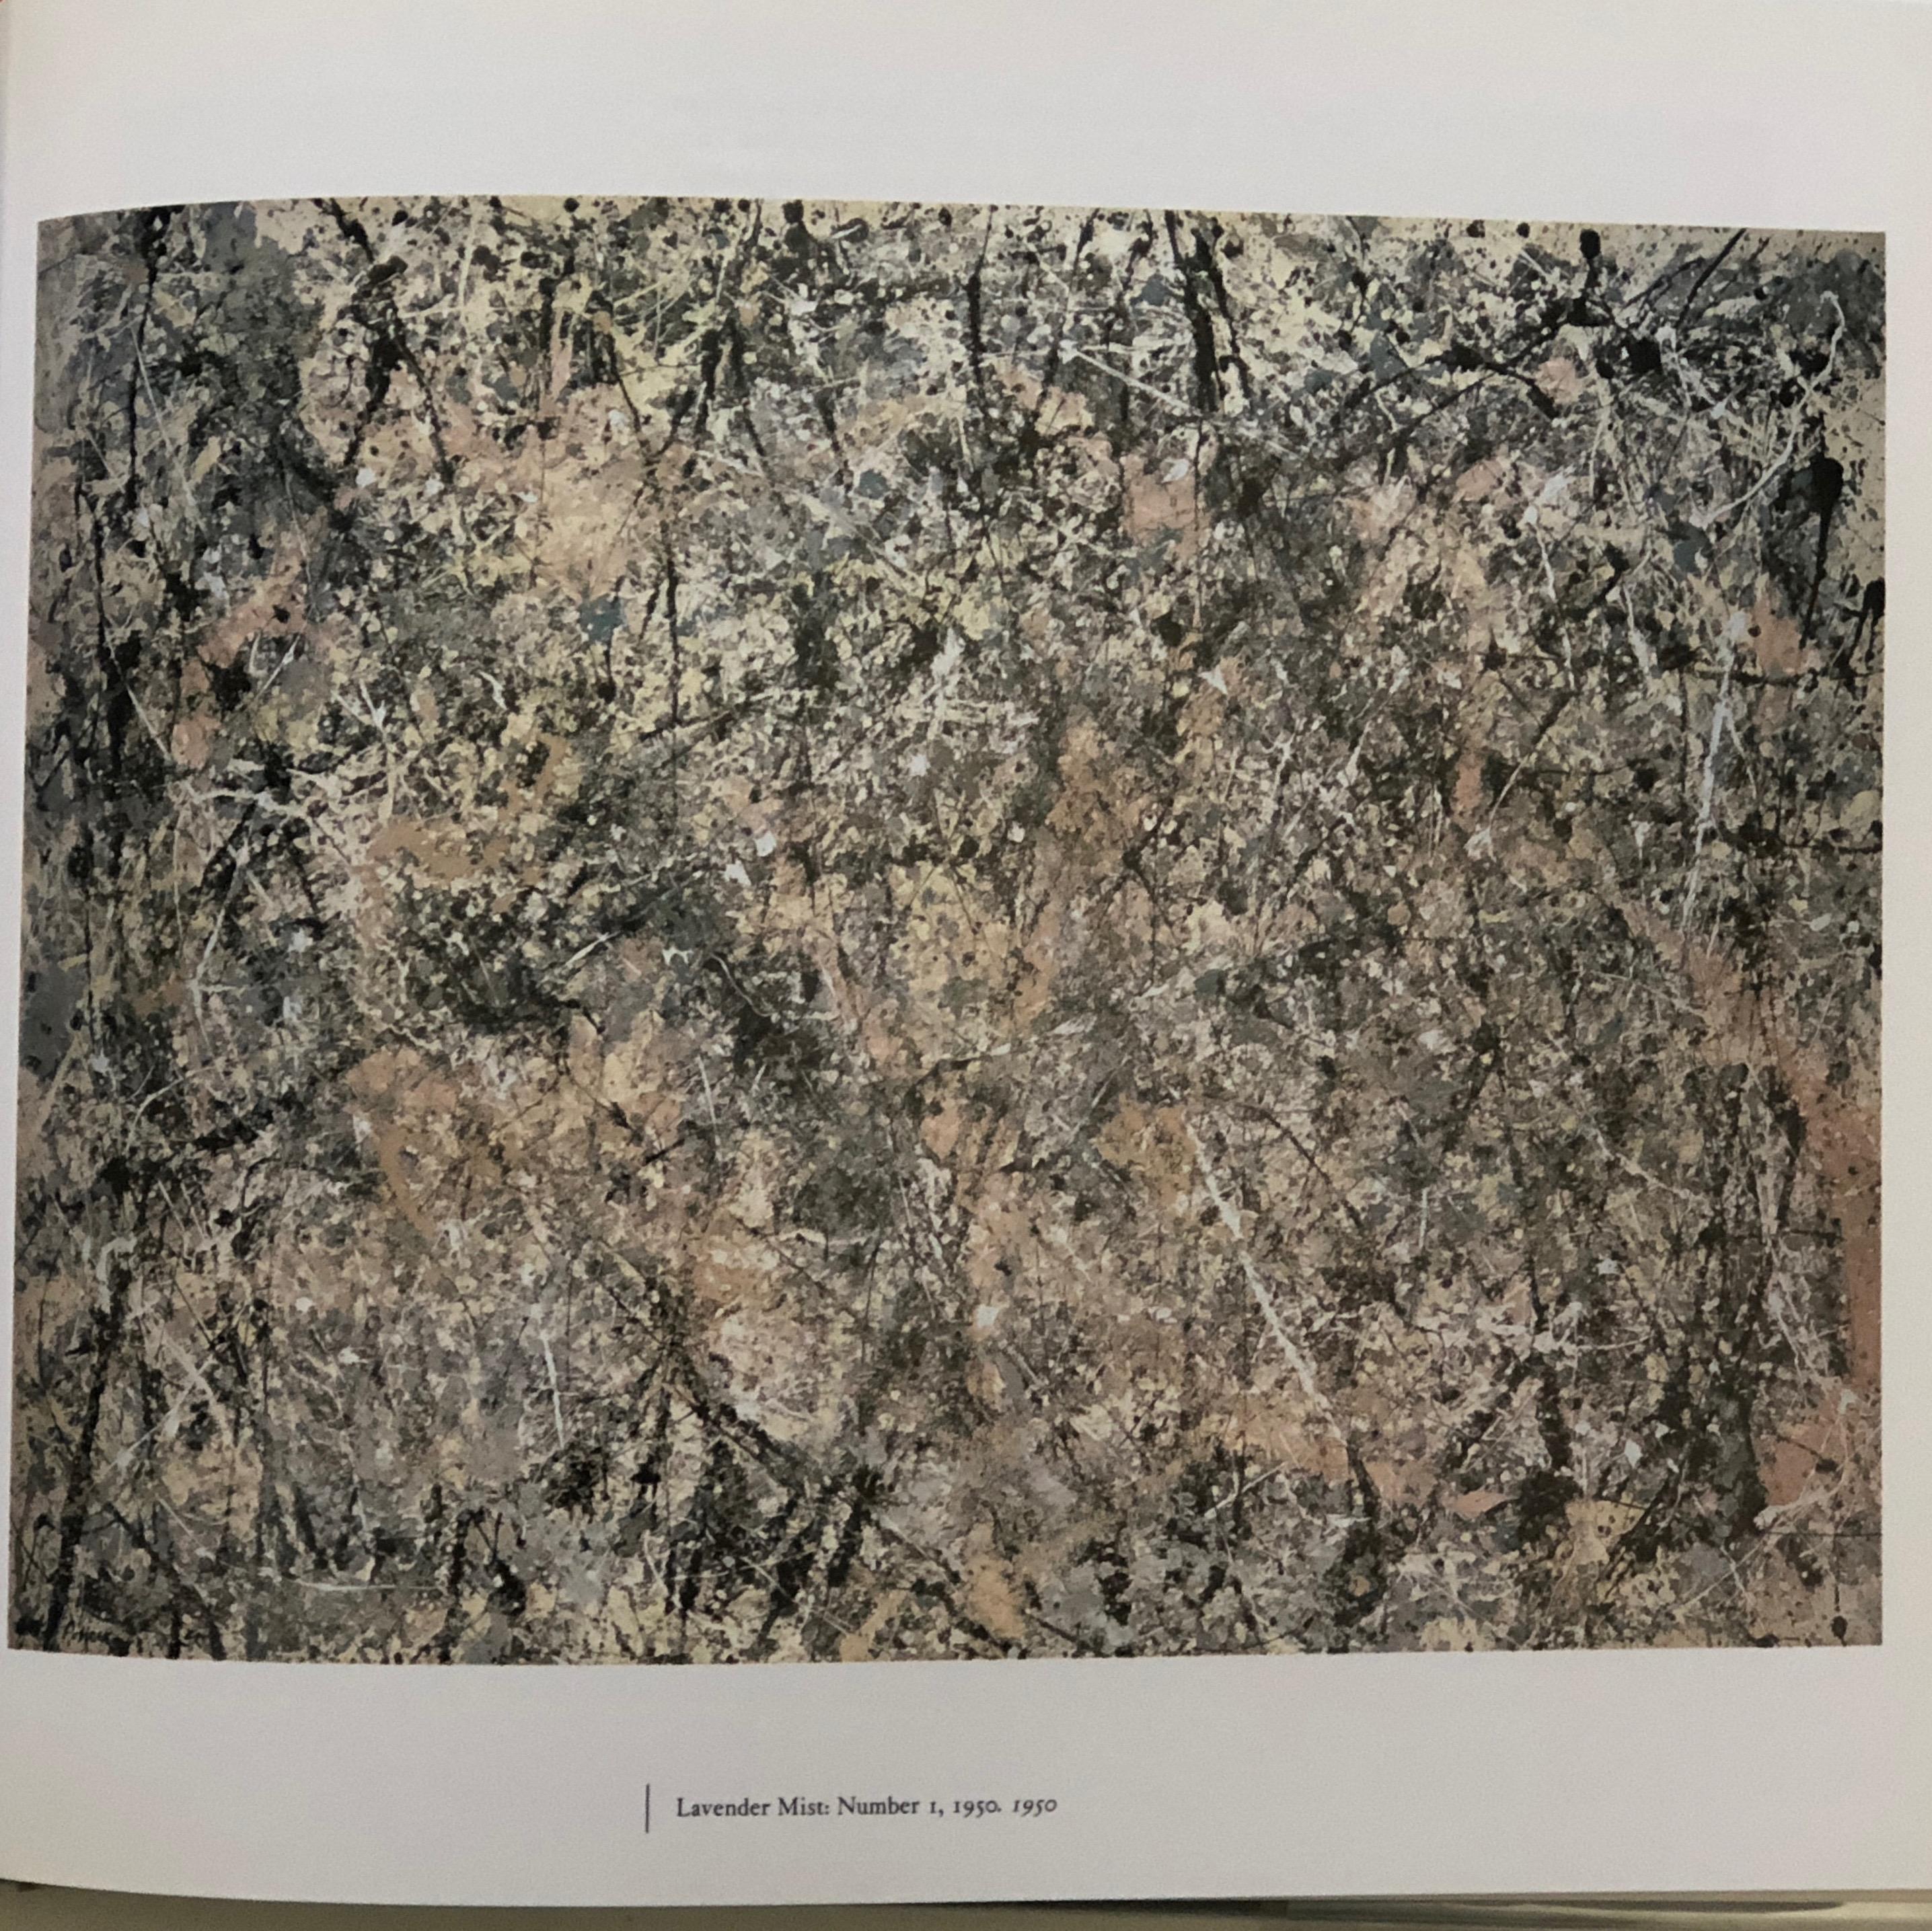 Jackson Pollock -Published by Abrams, 1989.

Beautifully illustrated with flip out pages this compelling book chronicles Pollock as a man and artist. From his early years in Wyoming through to the social and cultural milieu of New York, truly